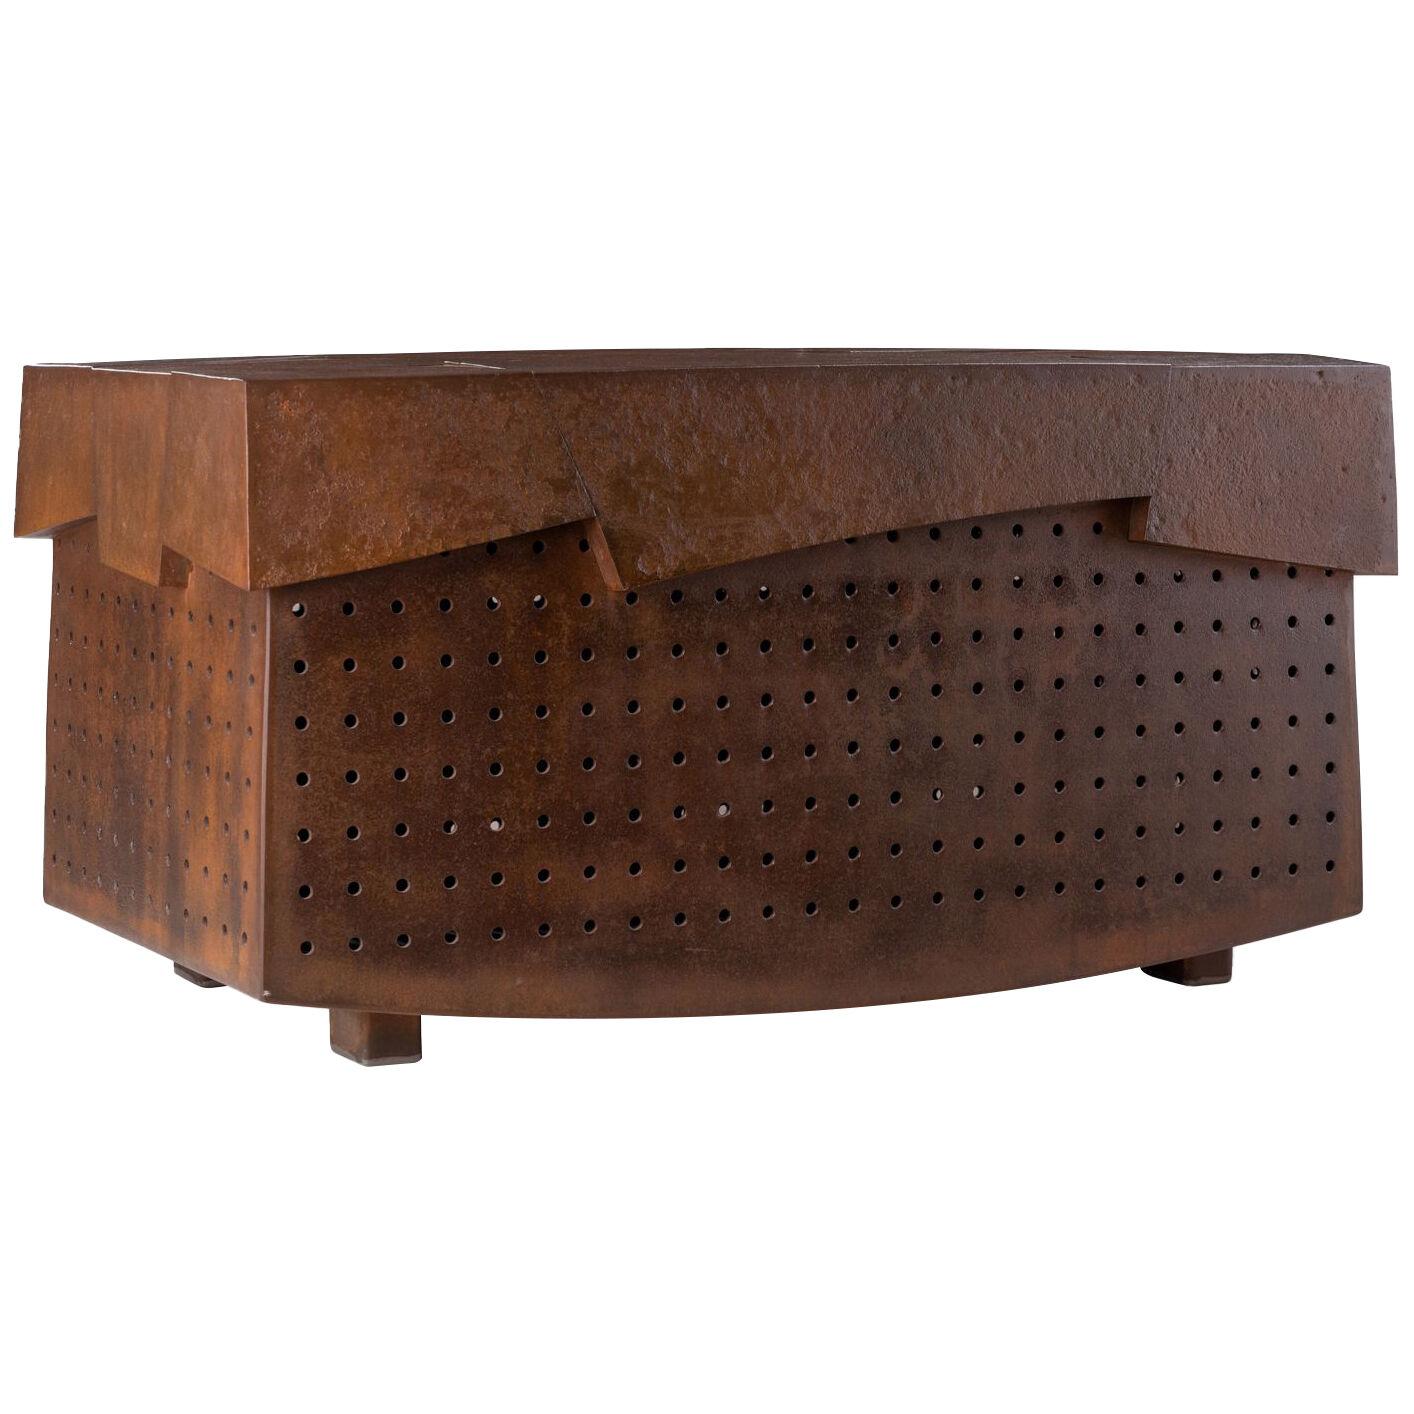 Mid century forged iron and steel ark bench